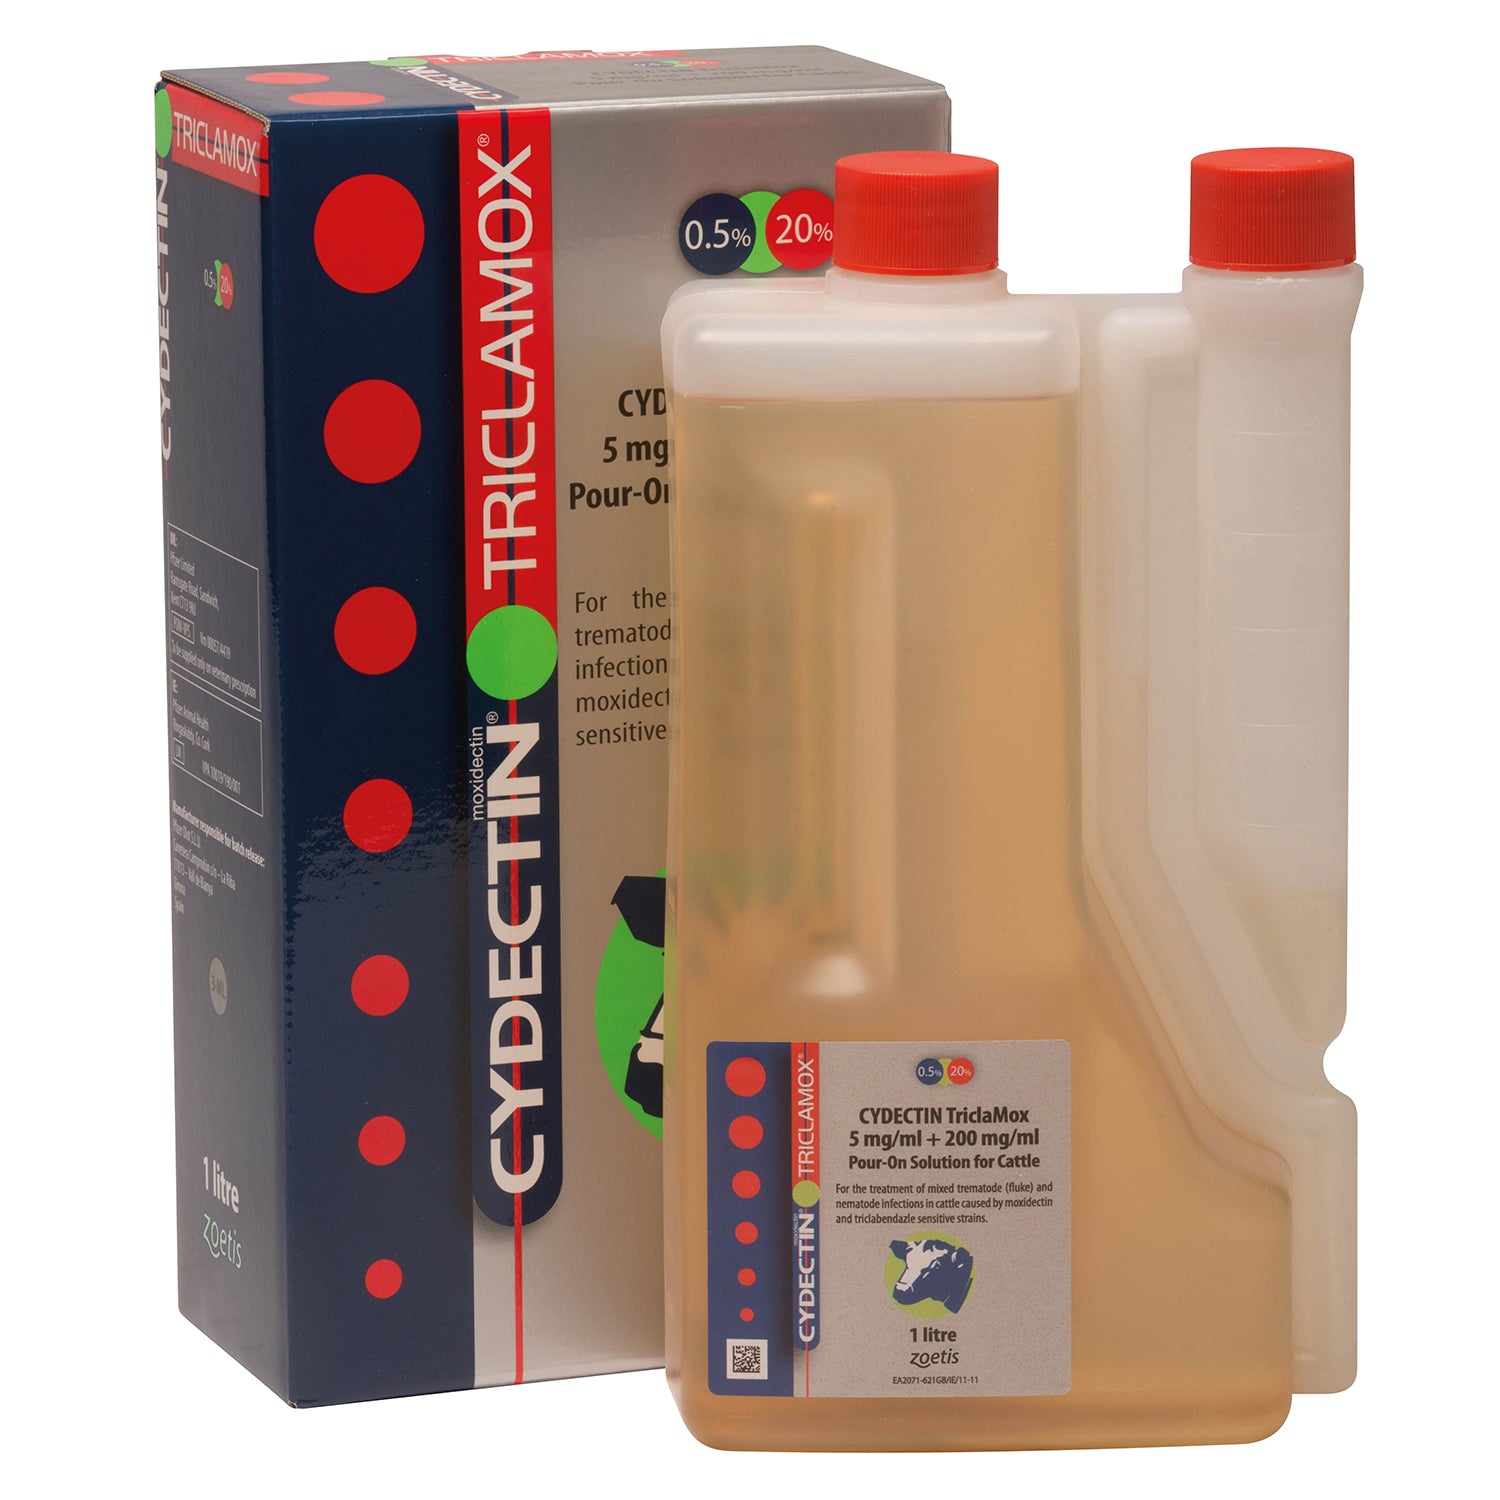 Cydectin Triclamox Pour-On for Cattle